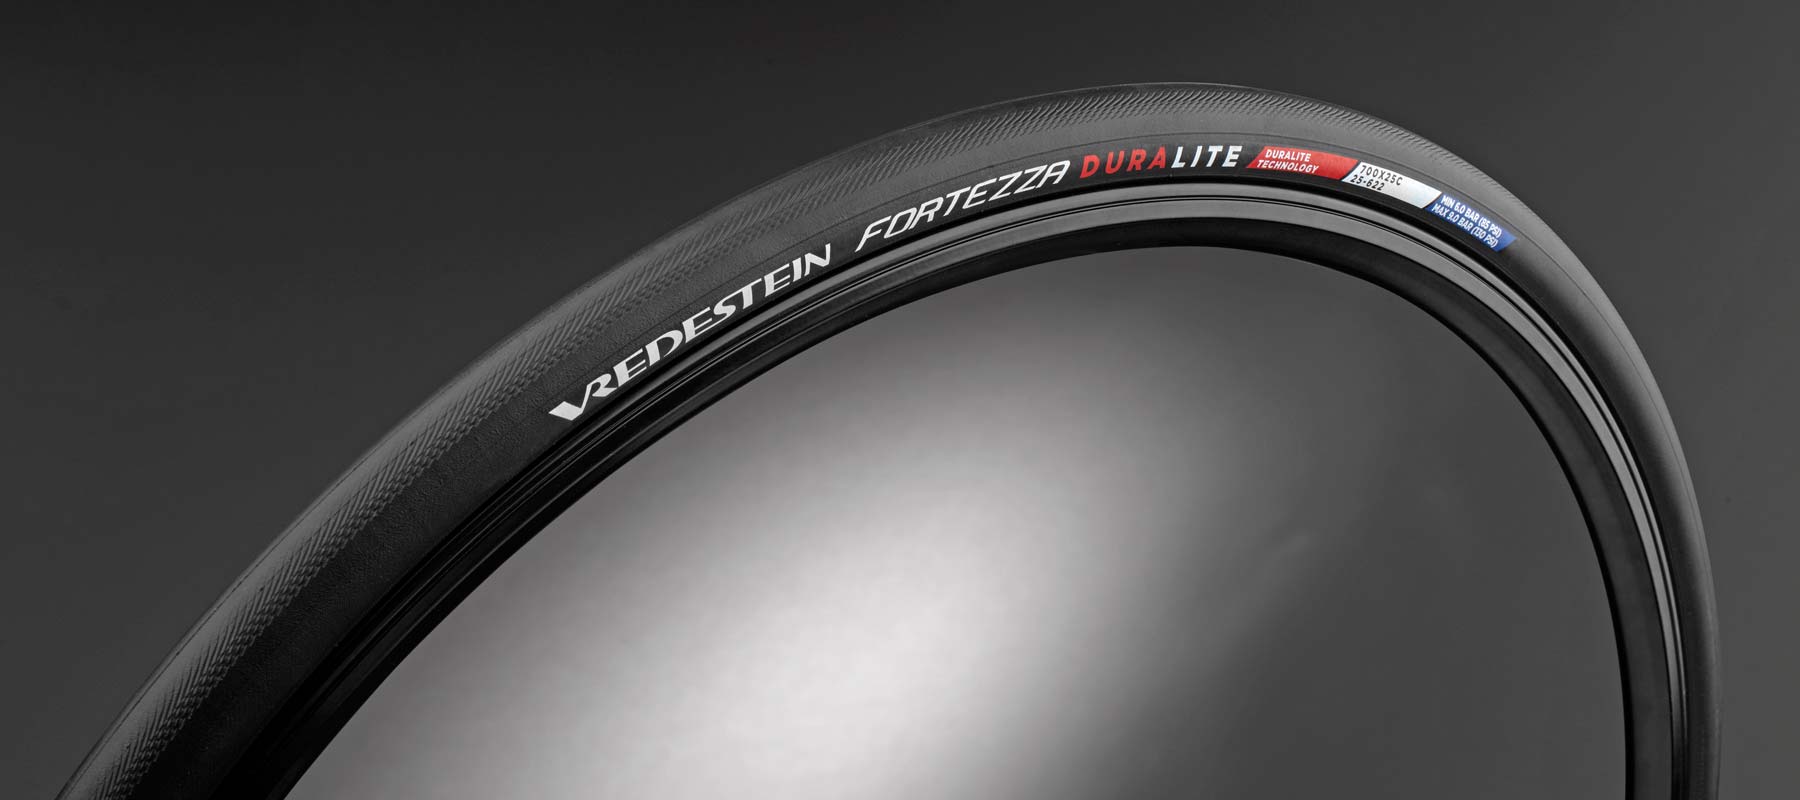 EB17: 5 new Vredestein Fortezza road tires get faster, tubeless 